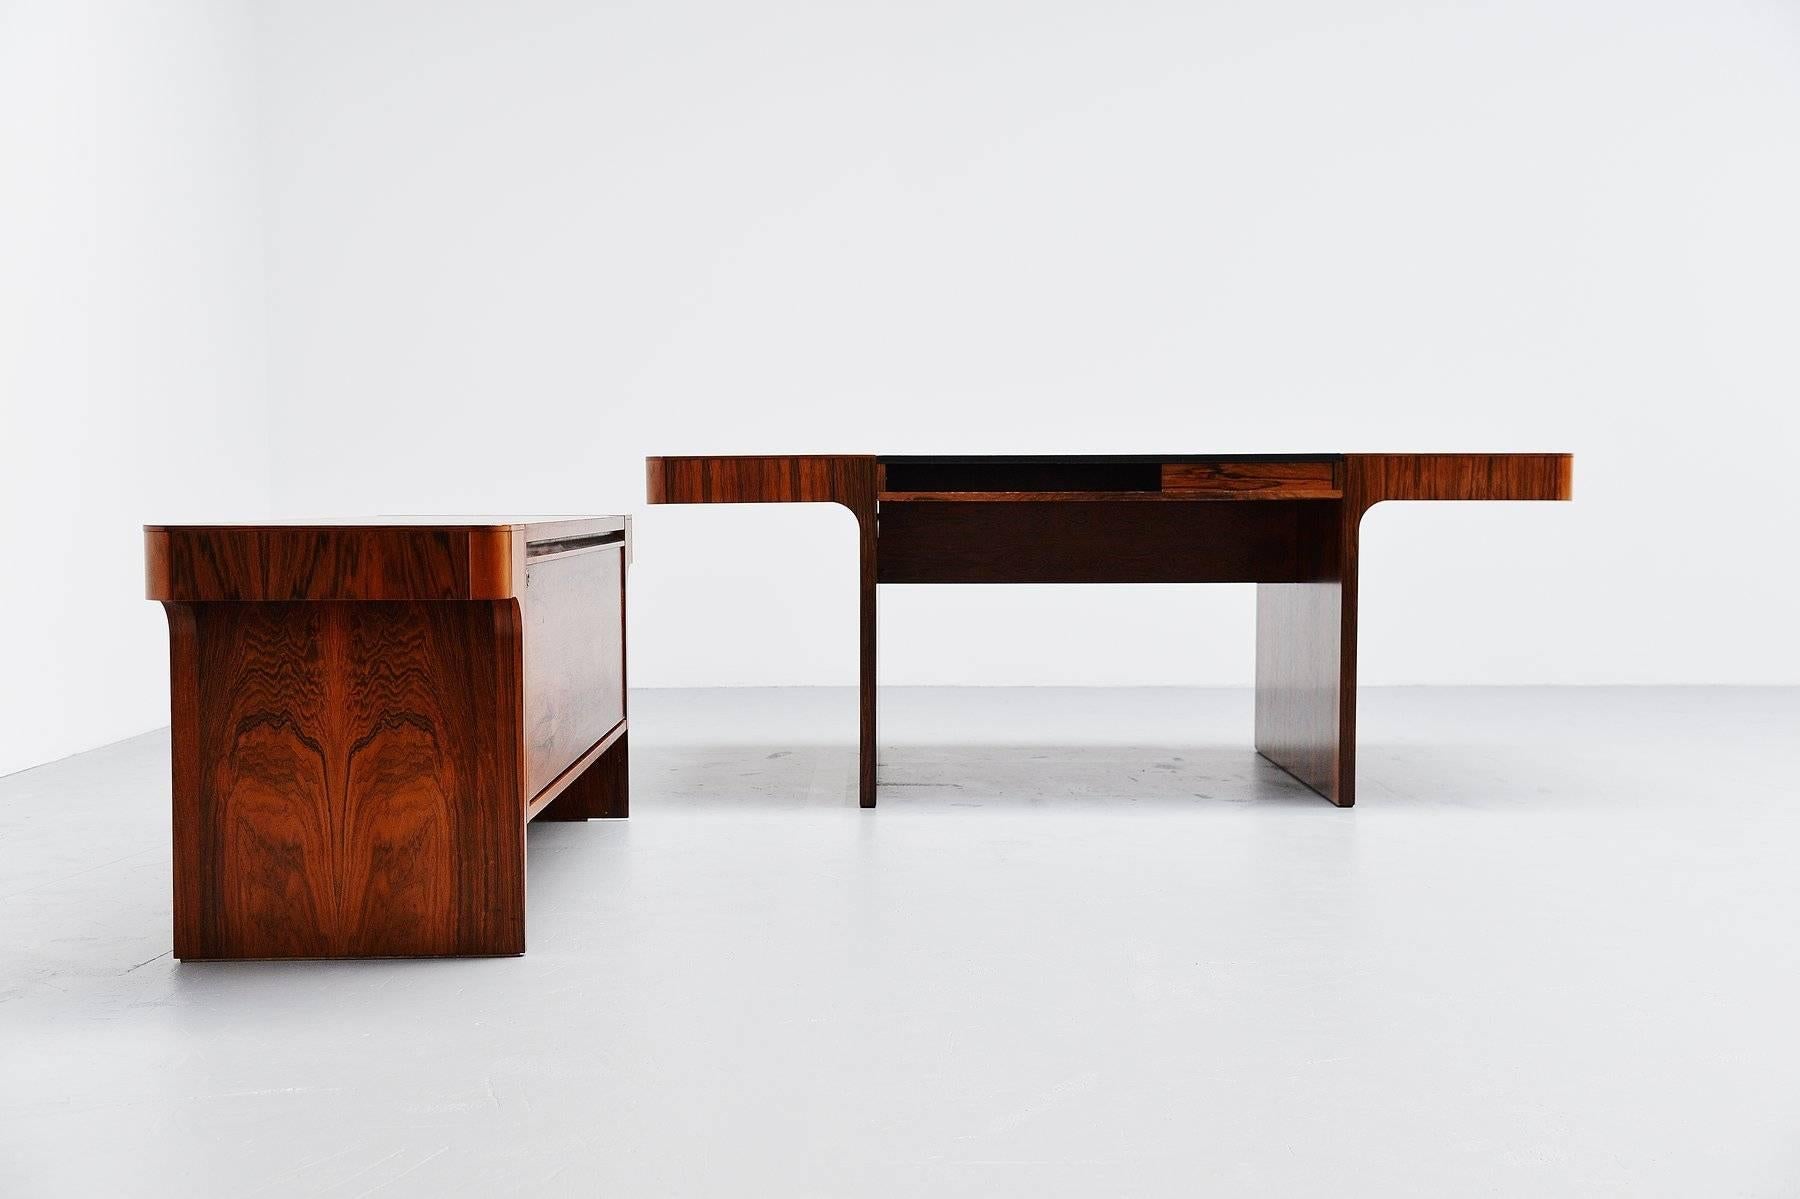 Extraordinary desk set in rosewood, Denmark, 1965. This very nicely shaped desk set has a conference desk and a similar shaped office cabinet with folding door. The desk can be used both sides, there are drawers on both sides and the working top is